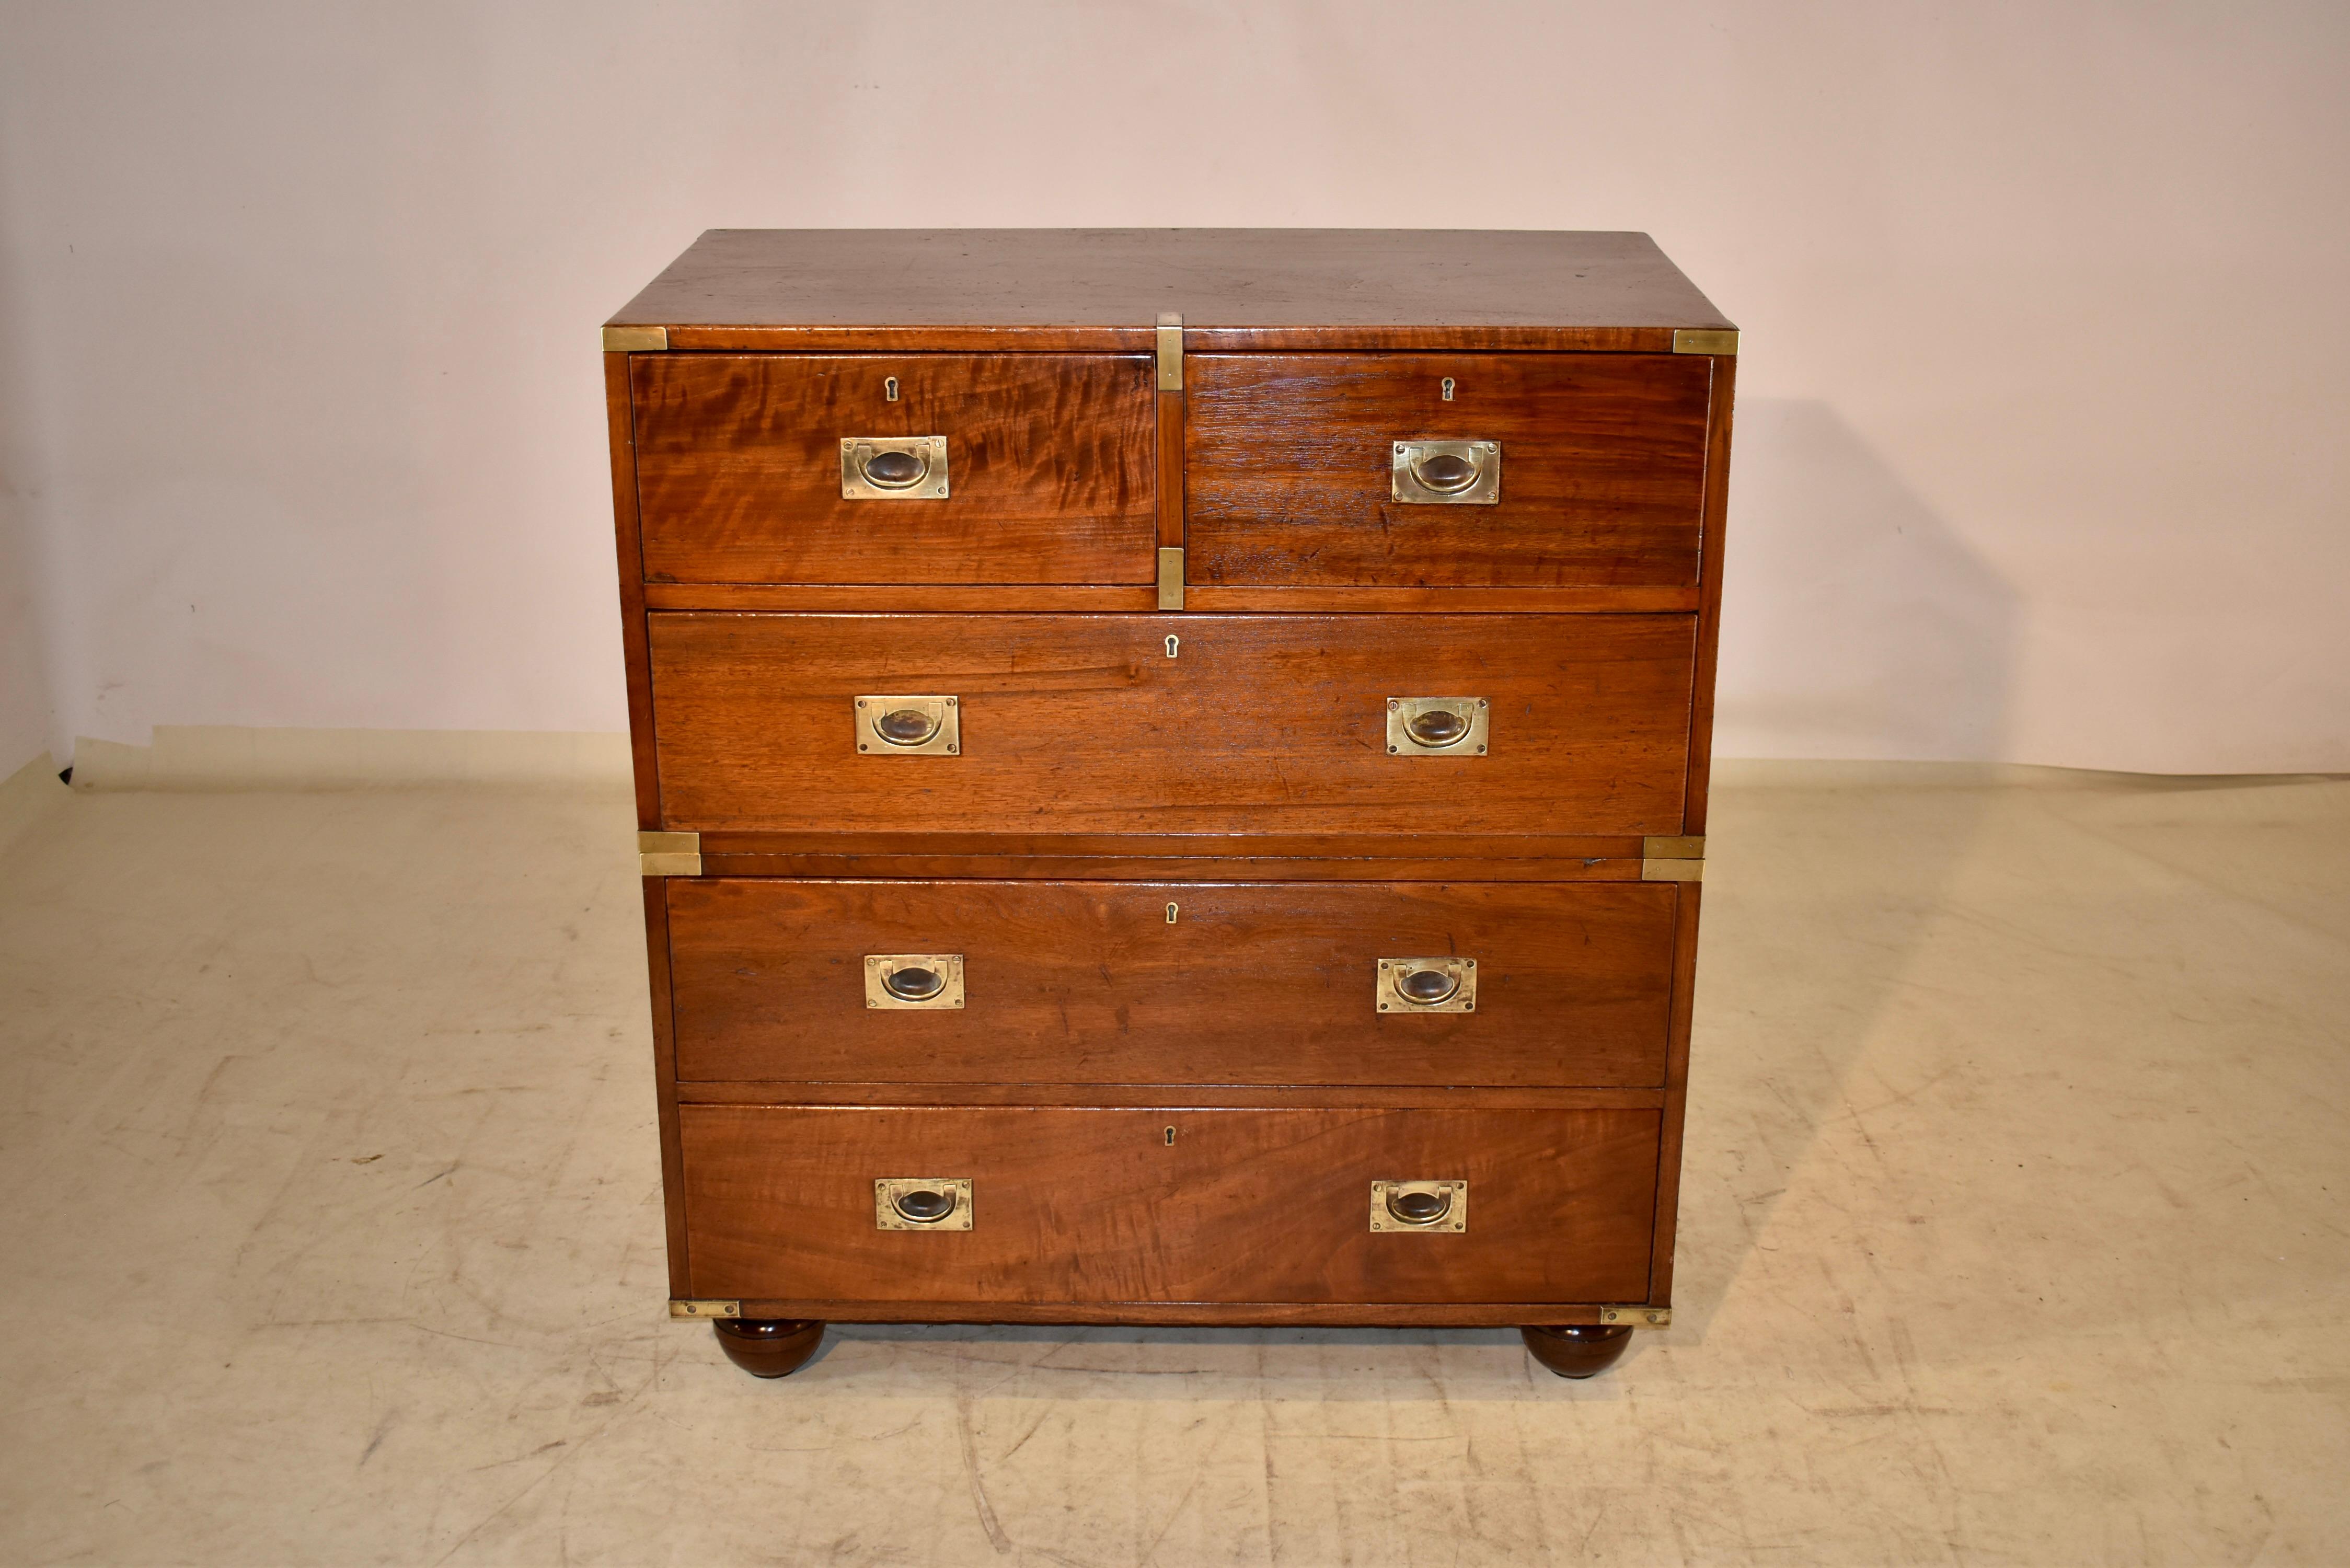 19th century English Campaign chest made form Mahogany. The Campaign pieces were made in pieces that were easy to break down and travel with and go on Campaign with the officers to whom they belonged. The case is banded with brass corners, and has